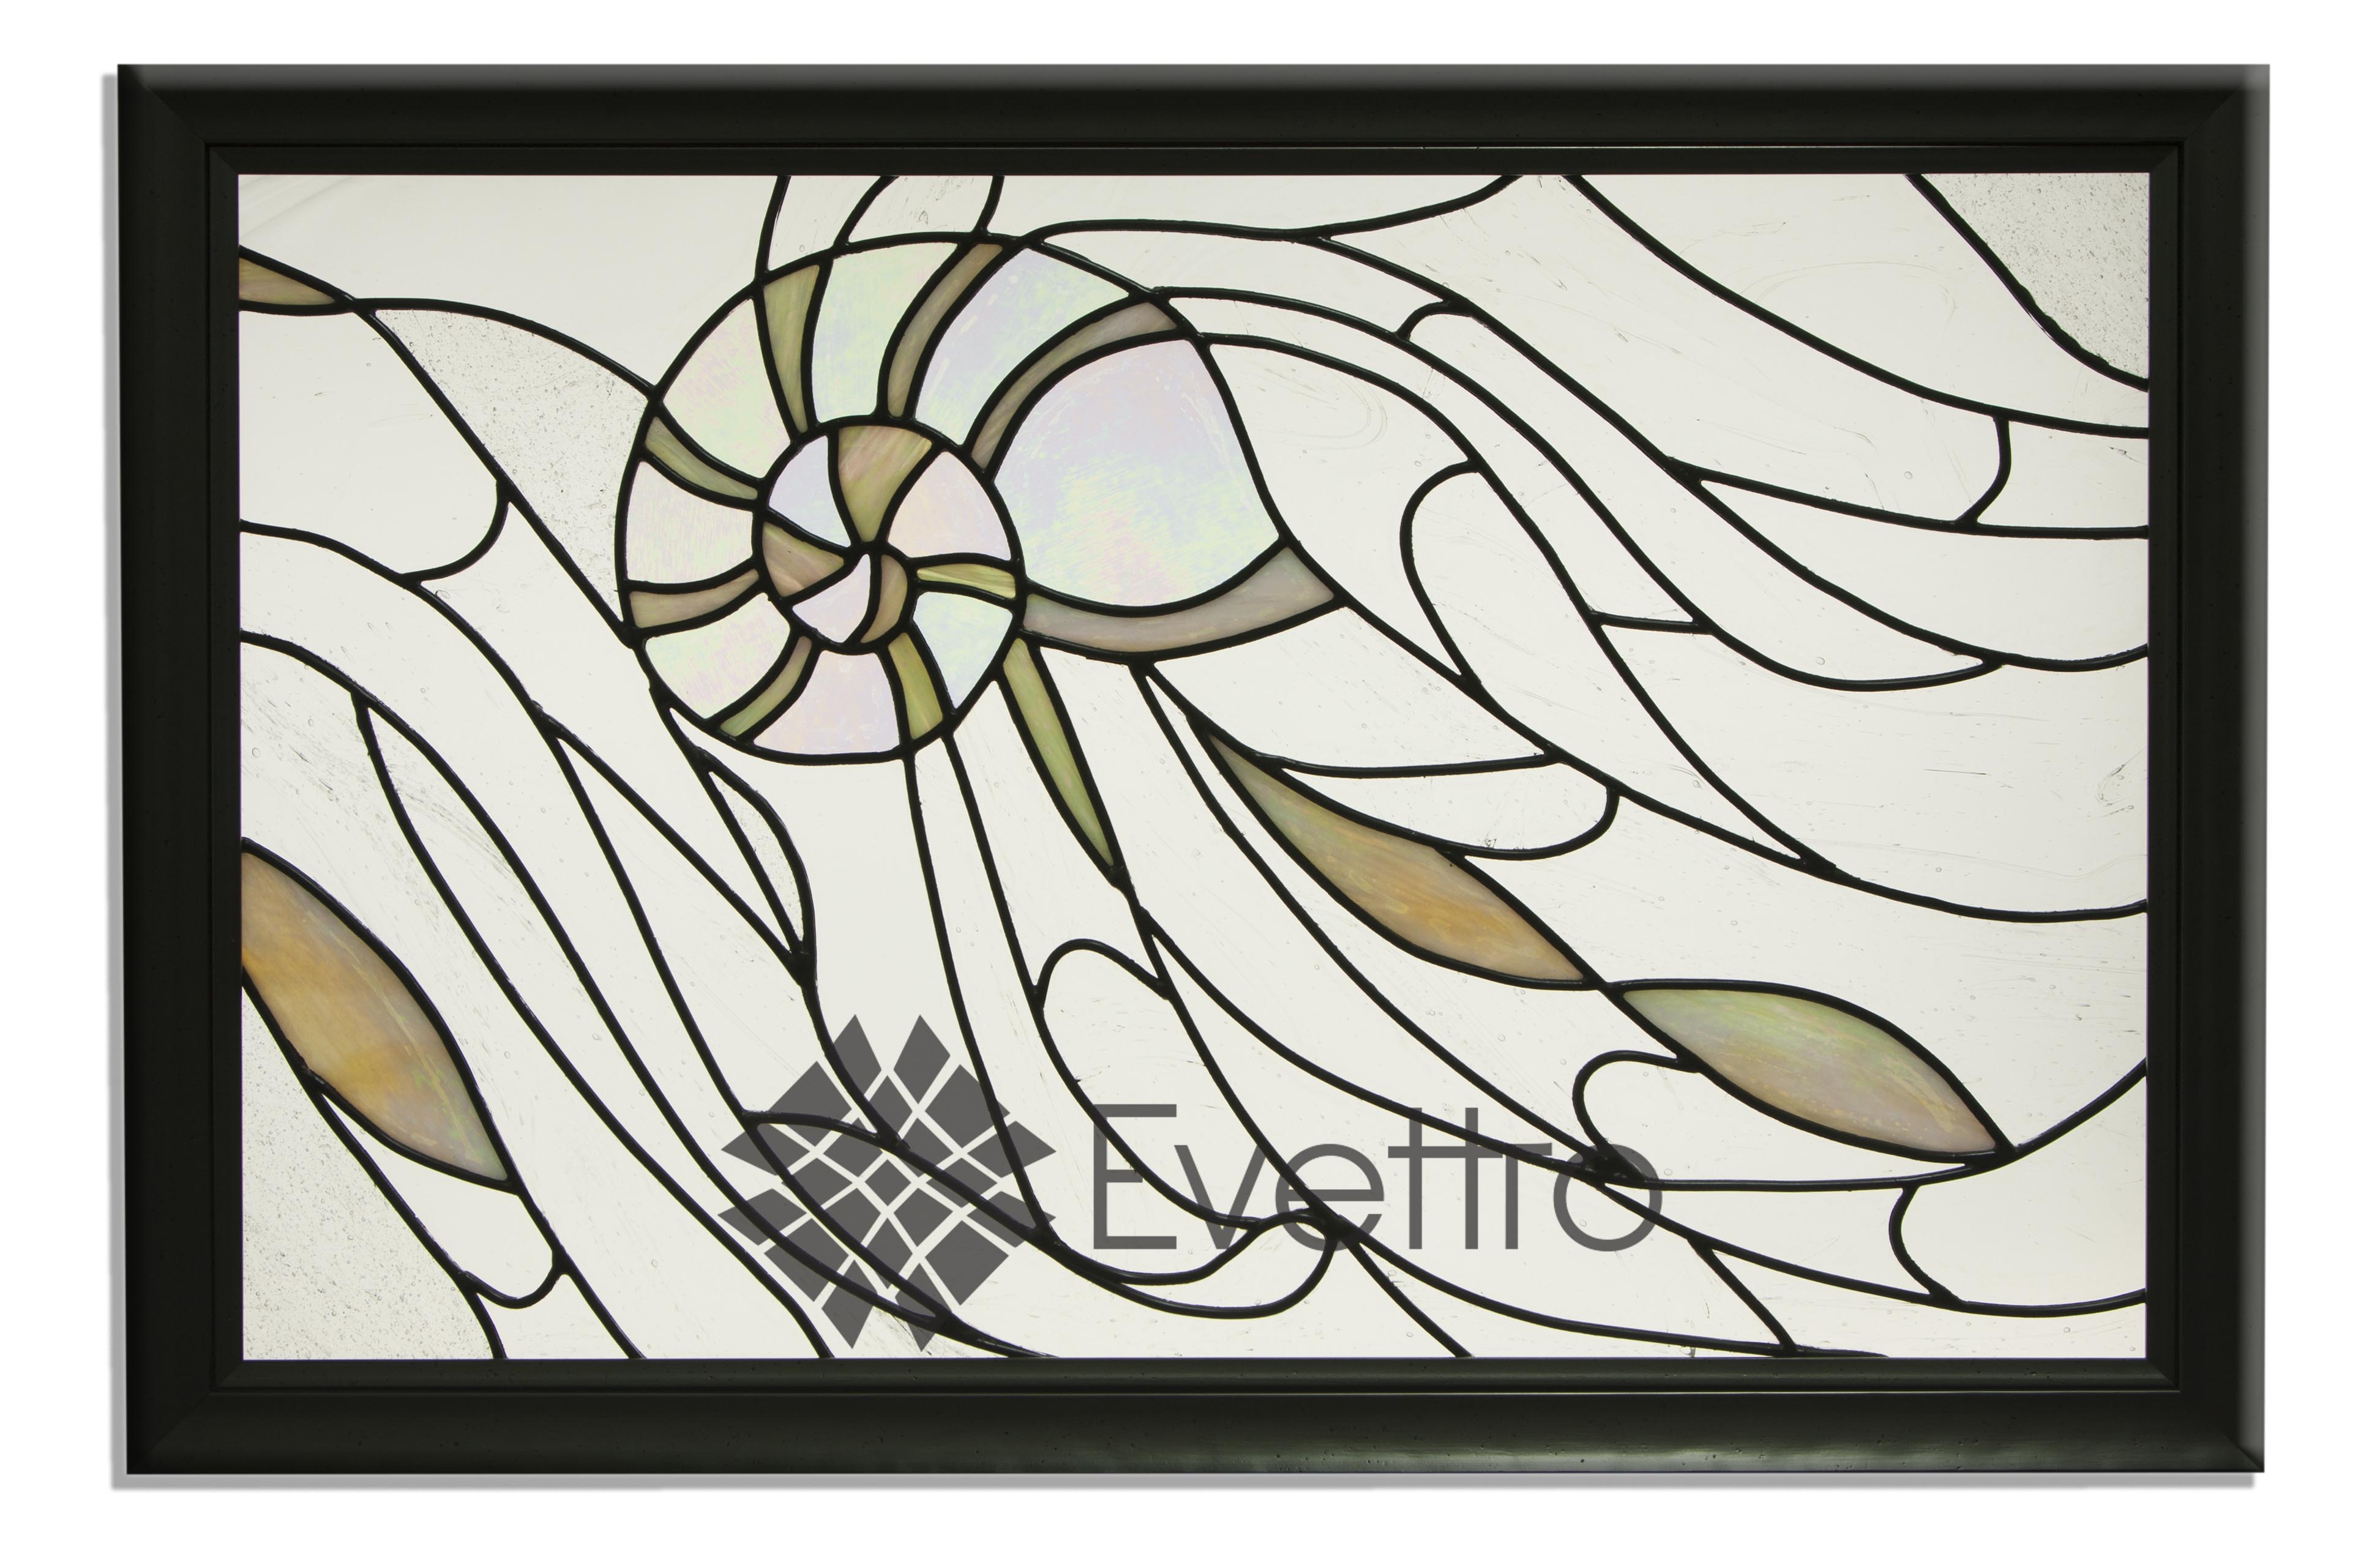 Nautical Stained Glass Window Panel